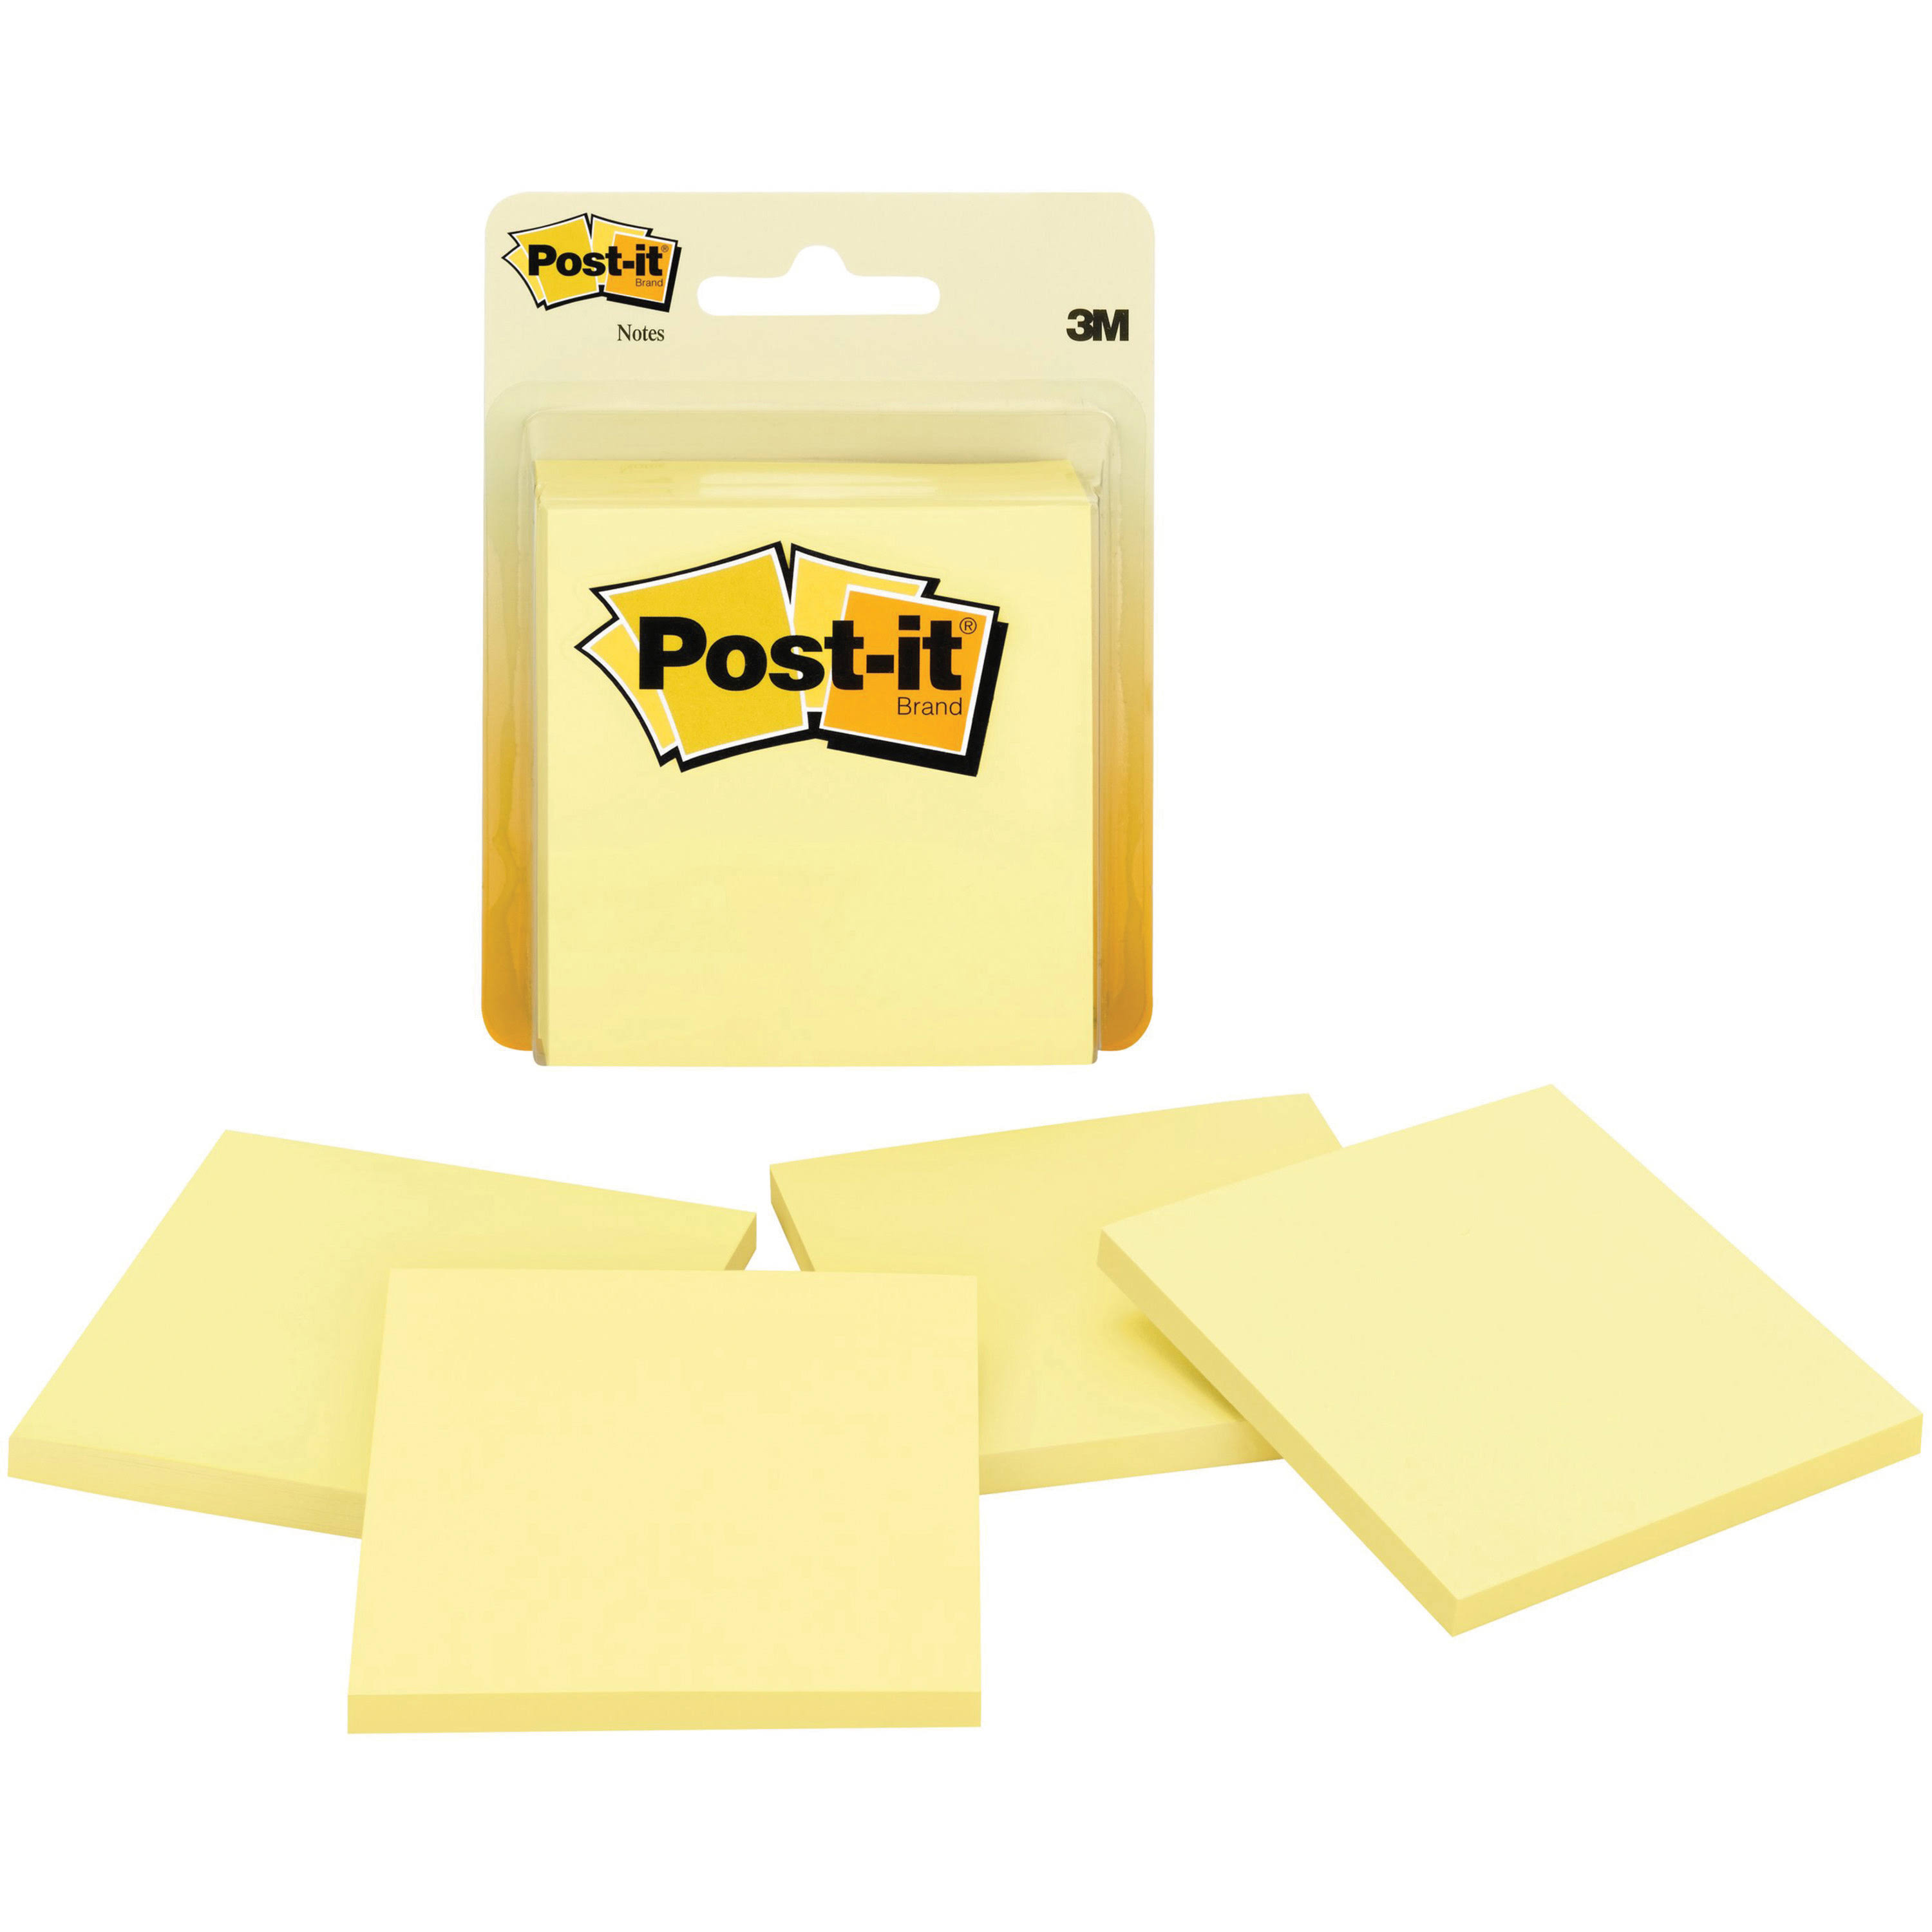 3M Post-It Notes - Yellow, 4 Pack